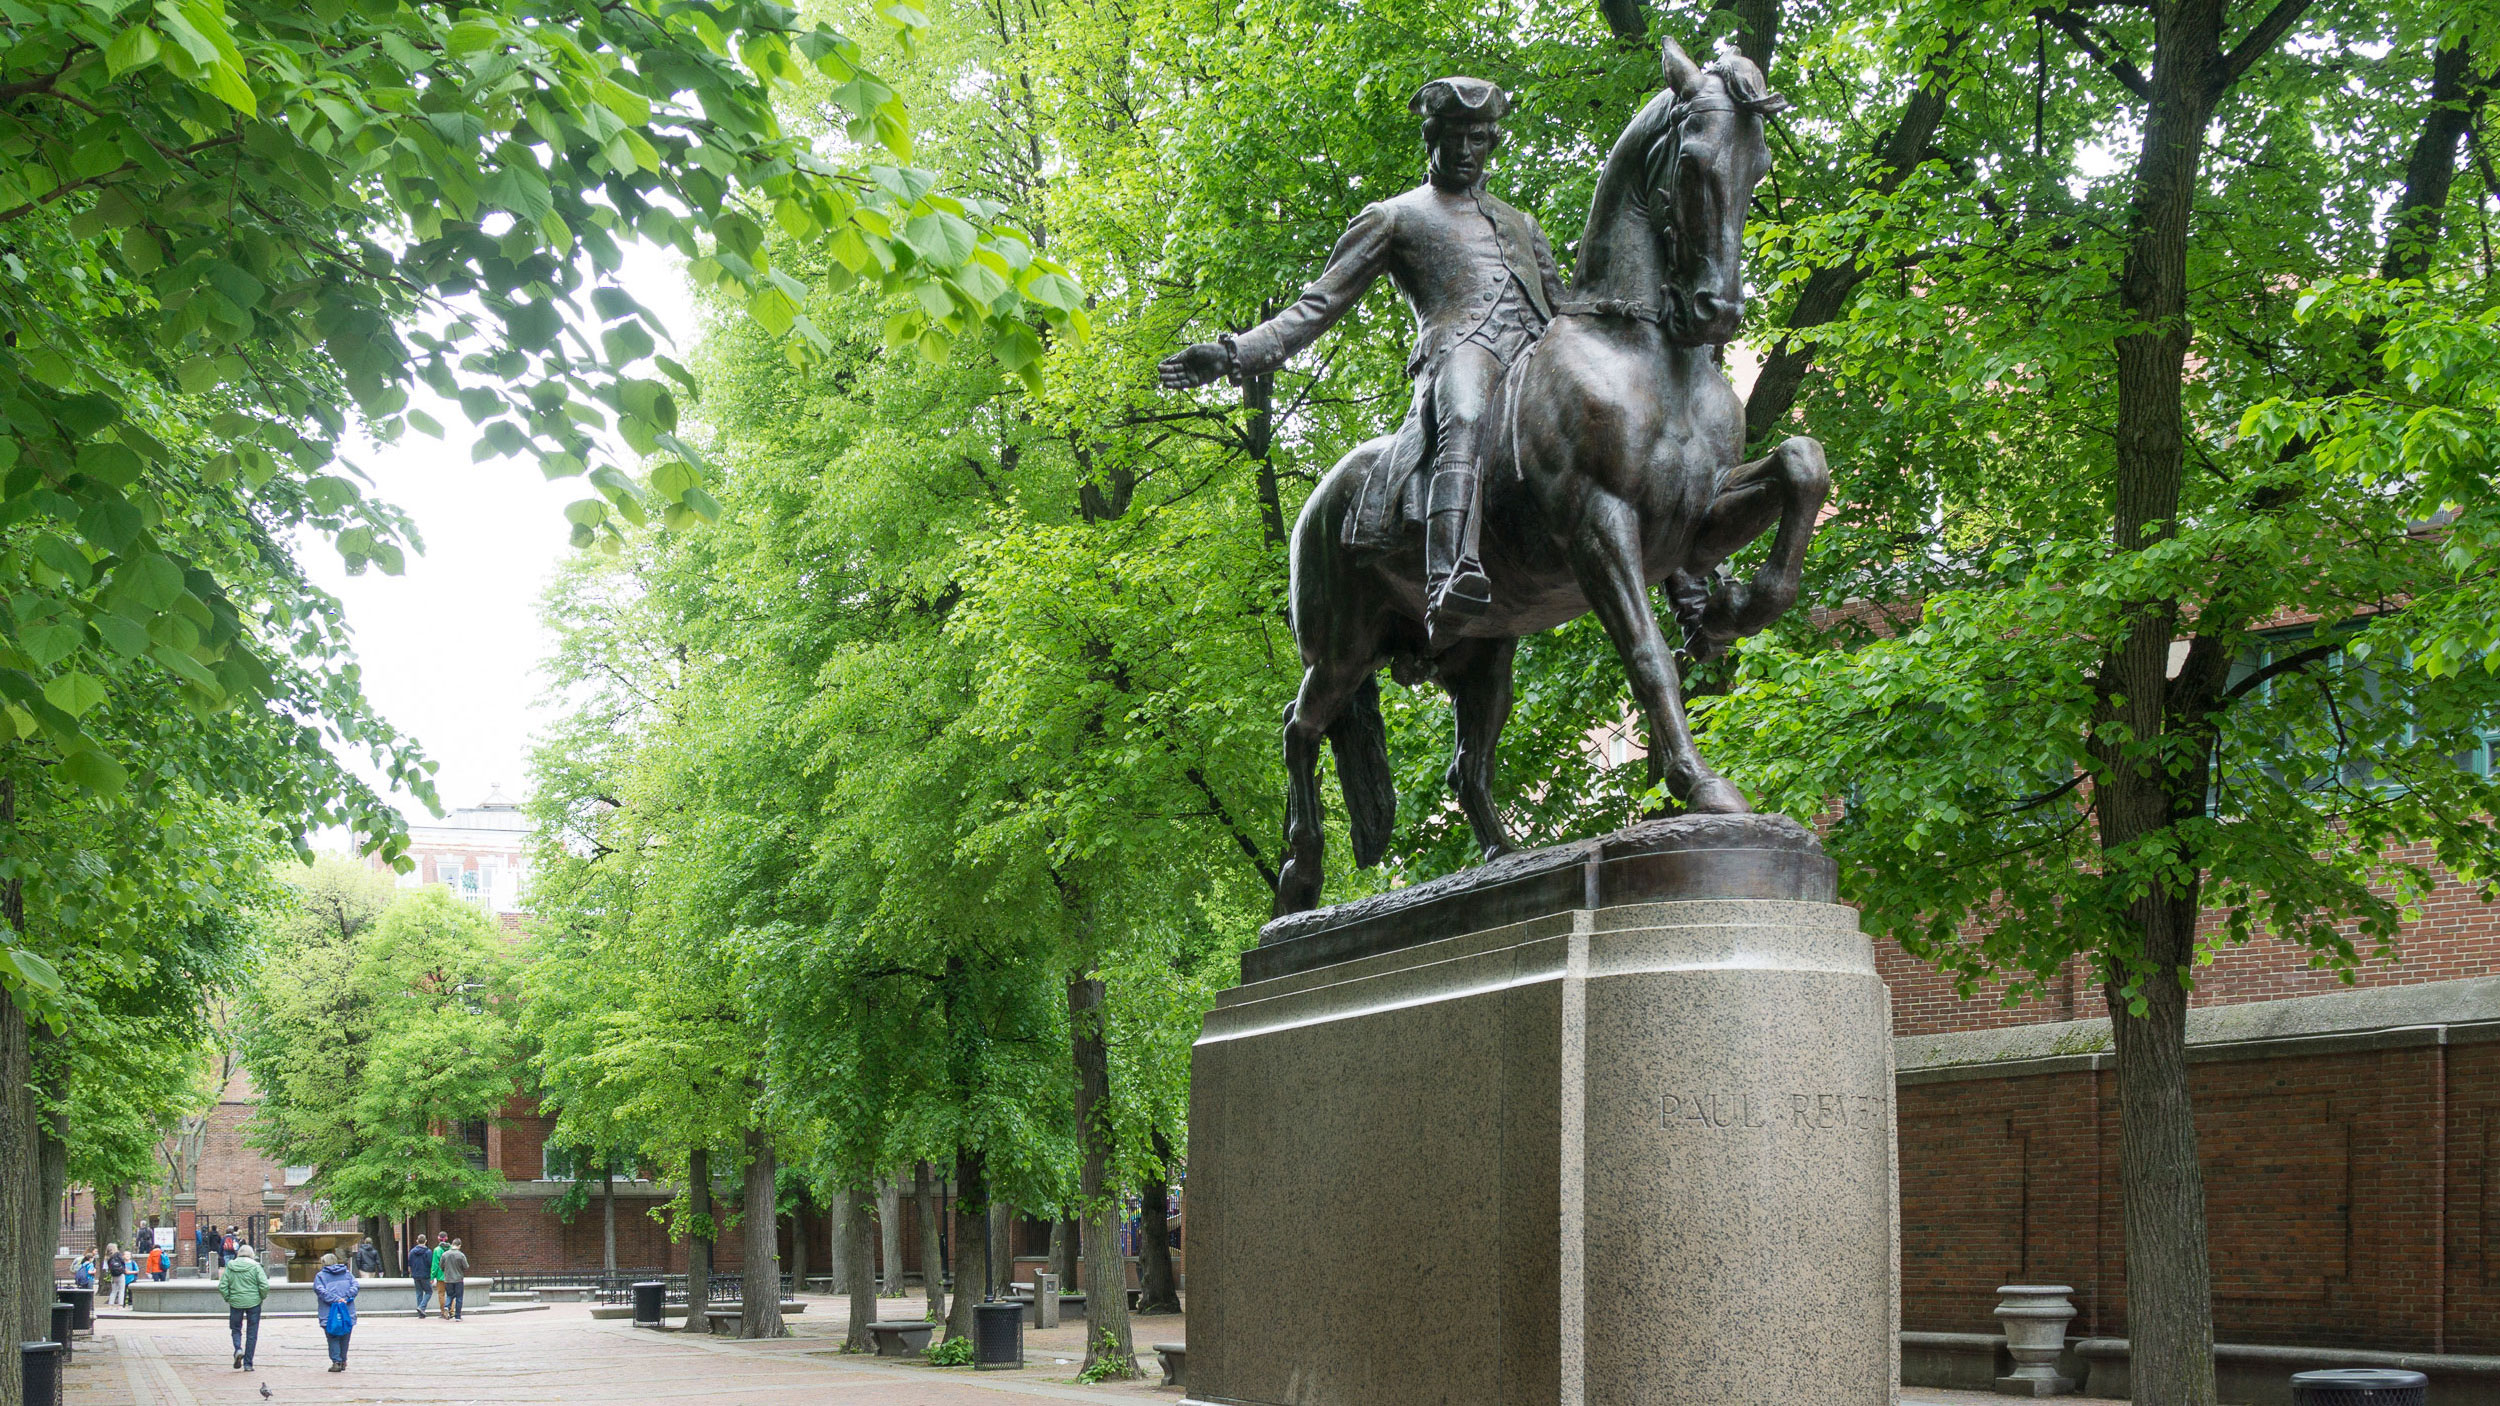 Paul Revere Mall in Boston, MA Plan Your Next Trip